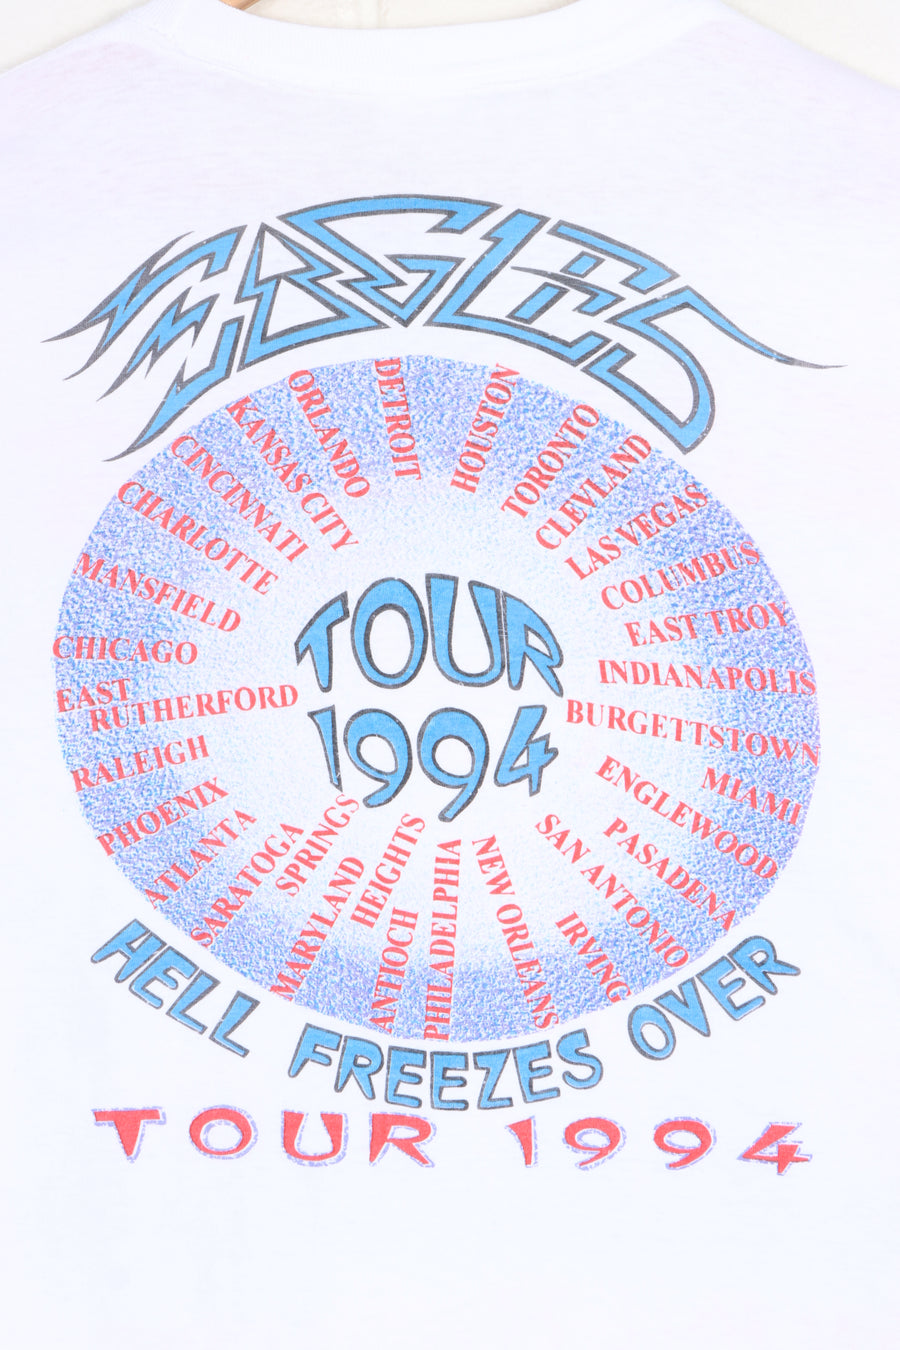 Eagles 1994 "When Hell Freezes Over" Tour Front Back Single Stitch T-Shirt (L)